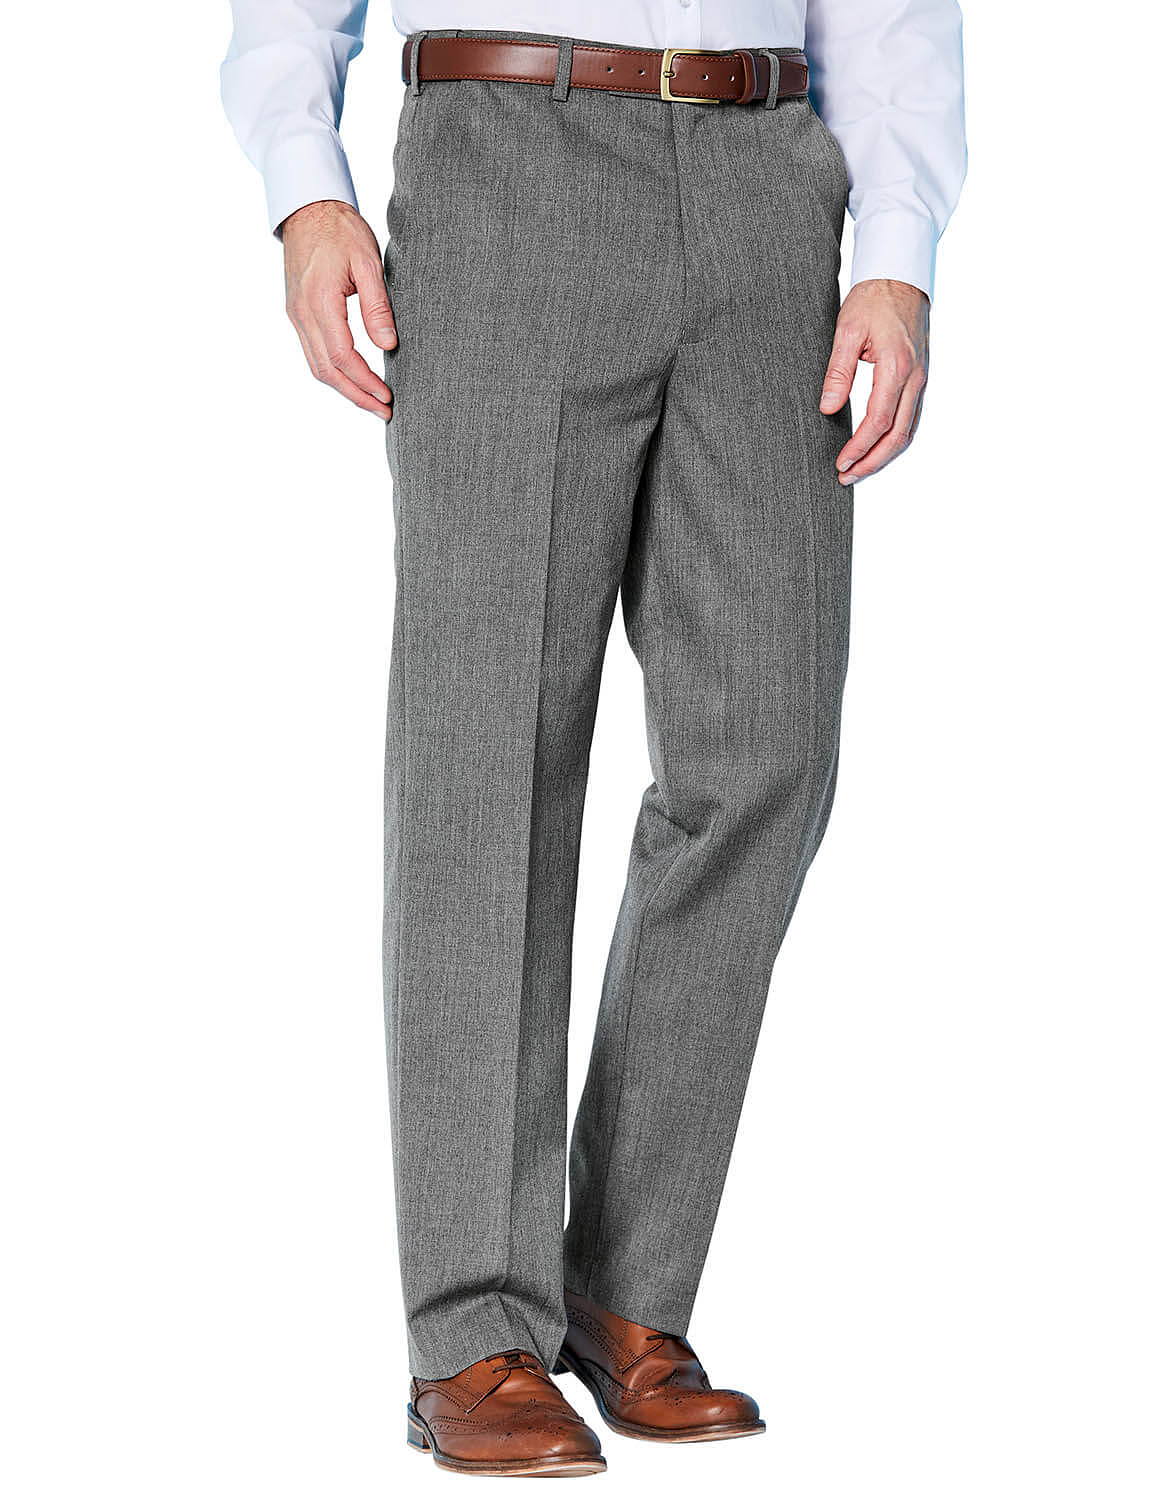 Gray Slim Fit Wool Pants for Men by GentWithcom  Worldwide Shipping